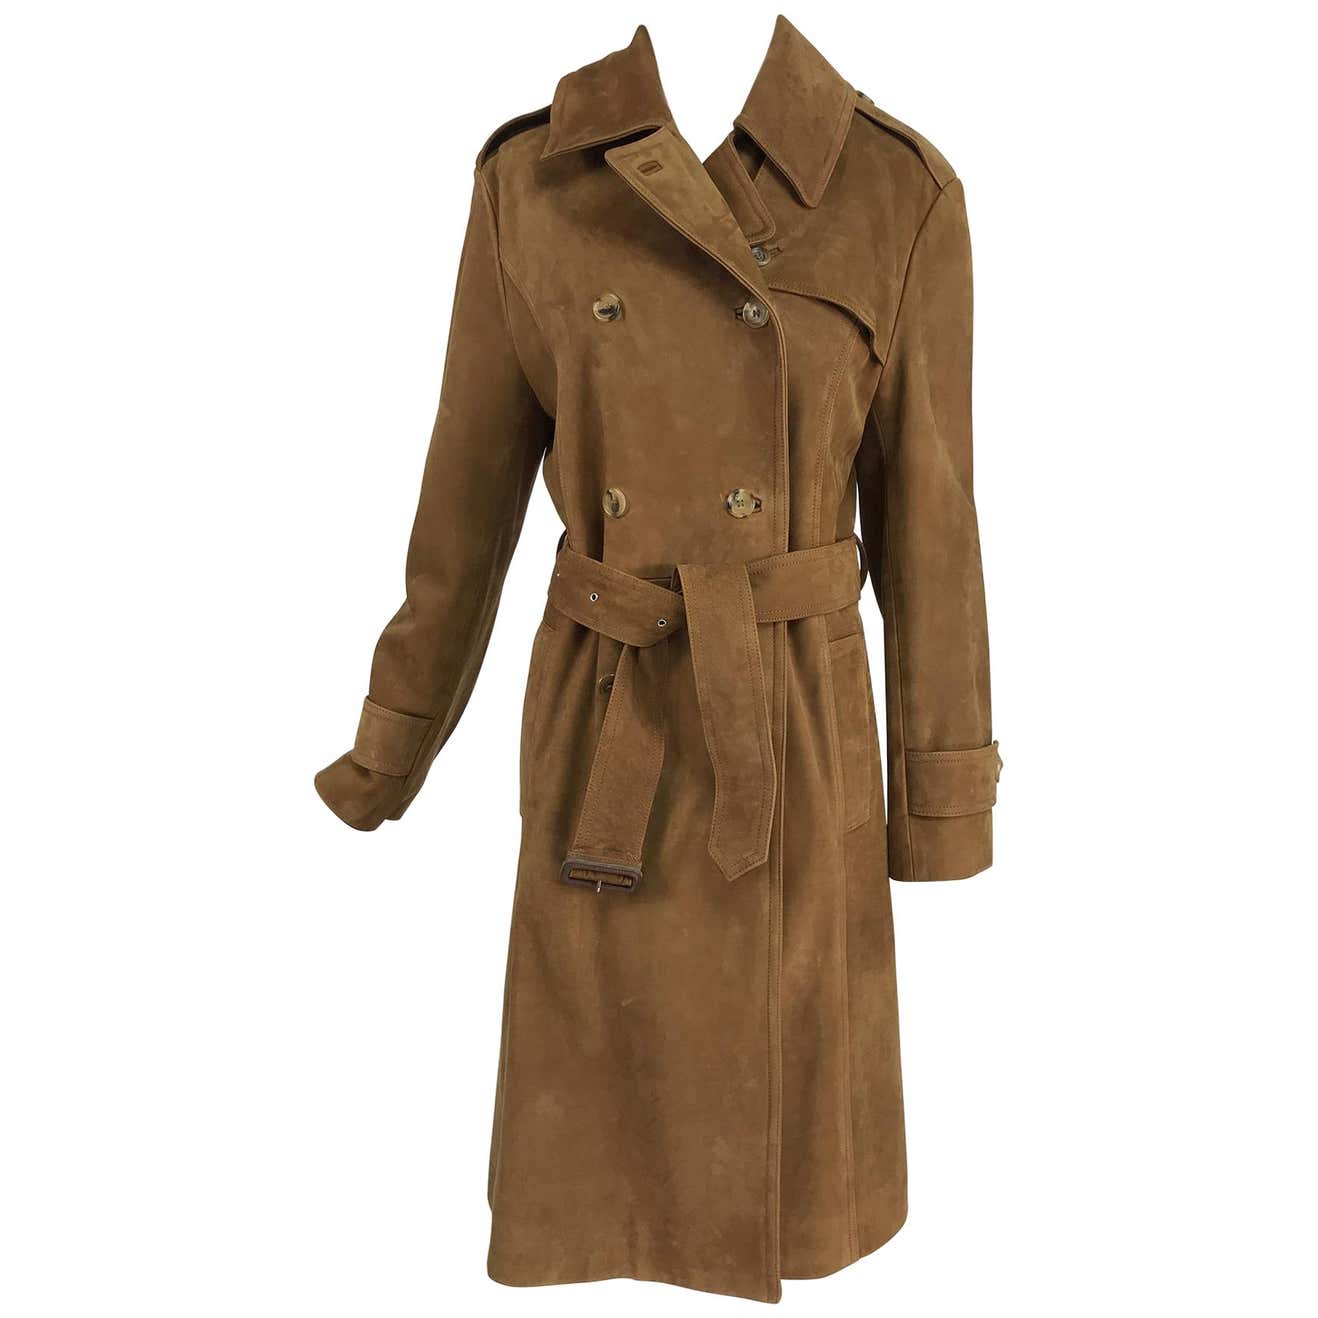 Vintage Burberrys' Hoxton Tobacco Suede Trench Coat 1990s. For Sale at ...